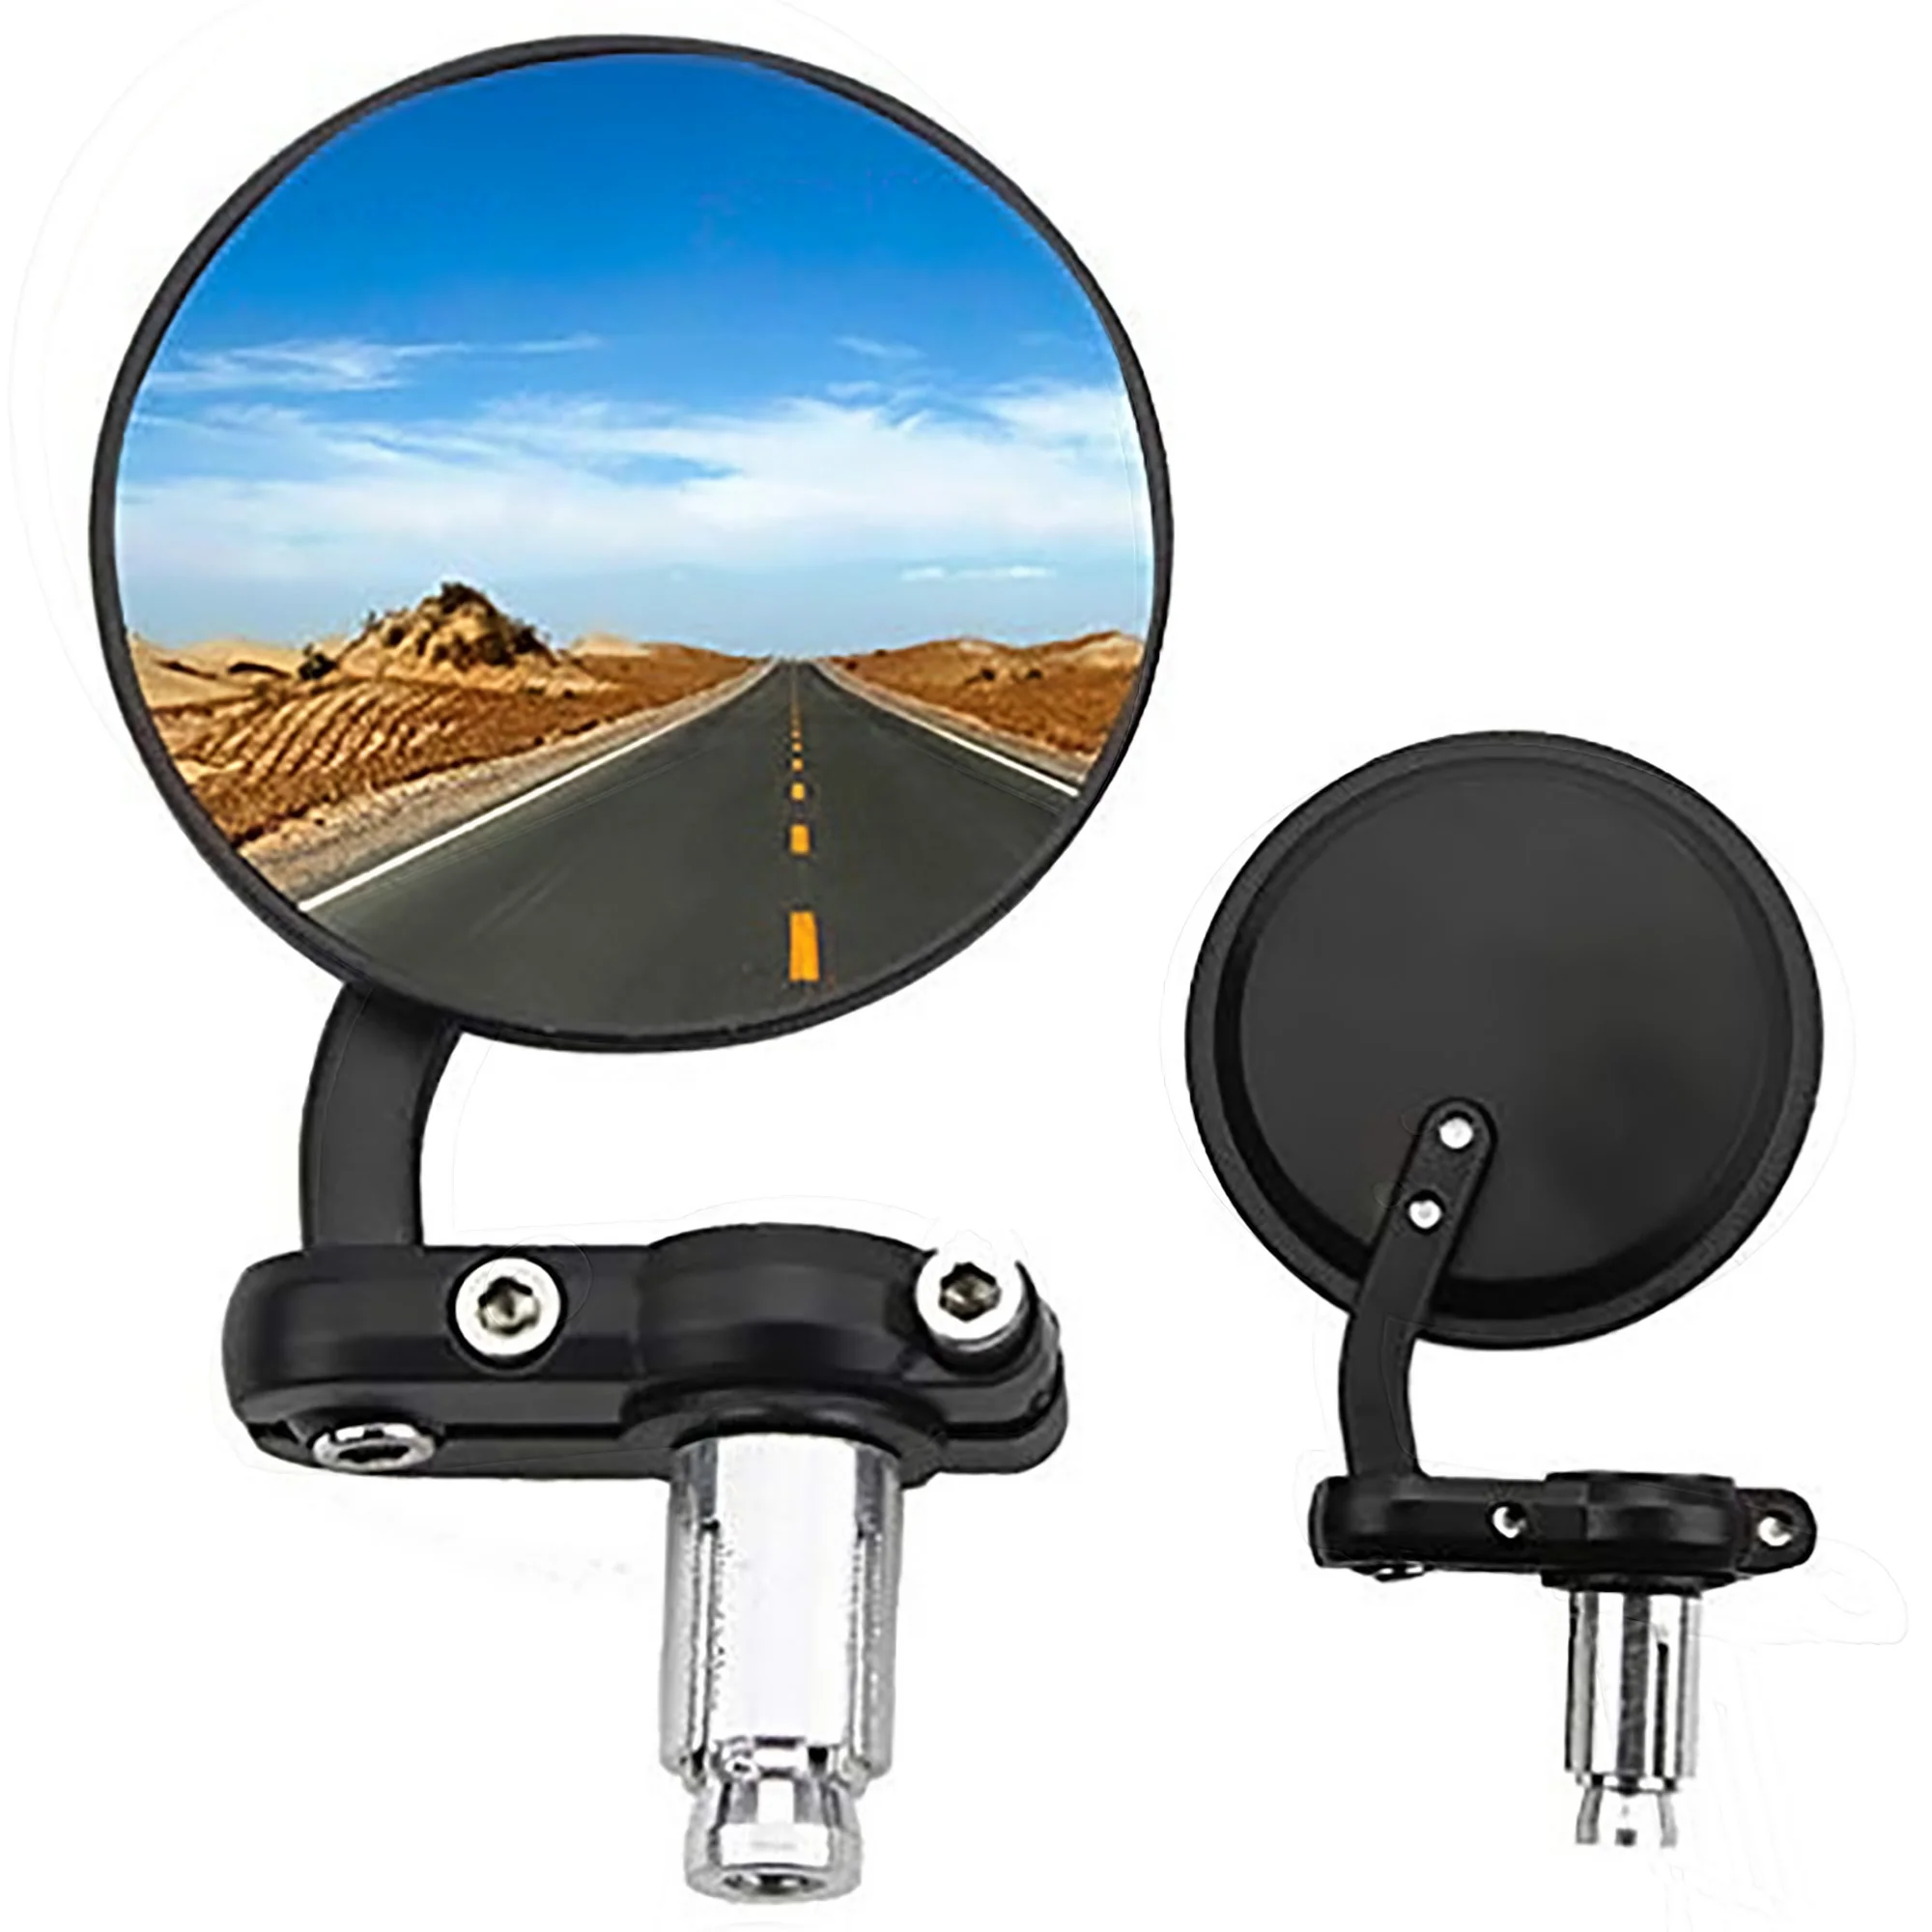 

GOOFIT 7/8 22mm Aluminum Round Motorcycle Rear View Side Mirror Accessories Handlebar Mirror Replacement For ATV Quad Scoter